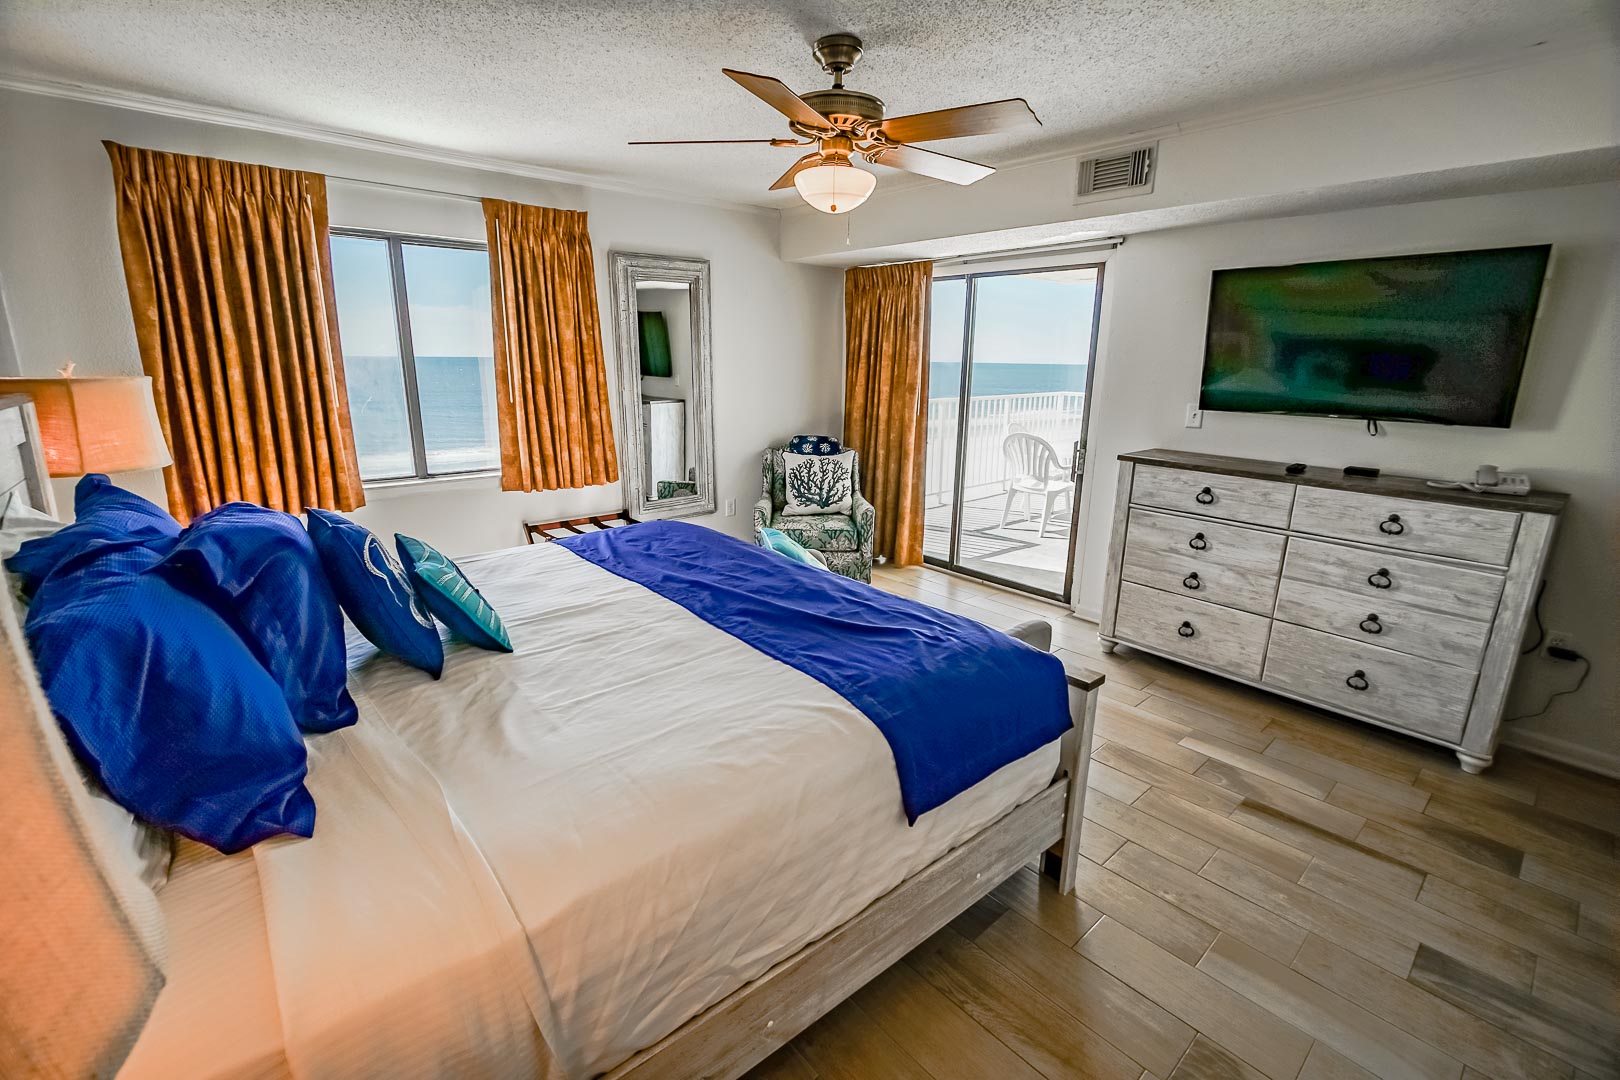 A beautiful master bedroom with an ocean view at VRI's Shoreline Towers in Gulf Shores, Alabama.